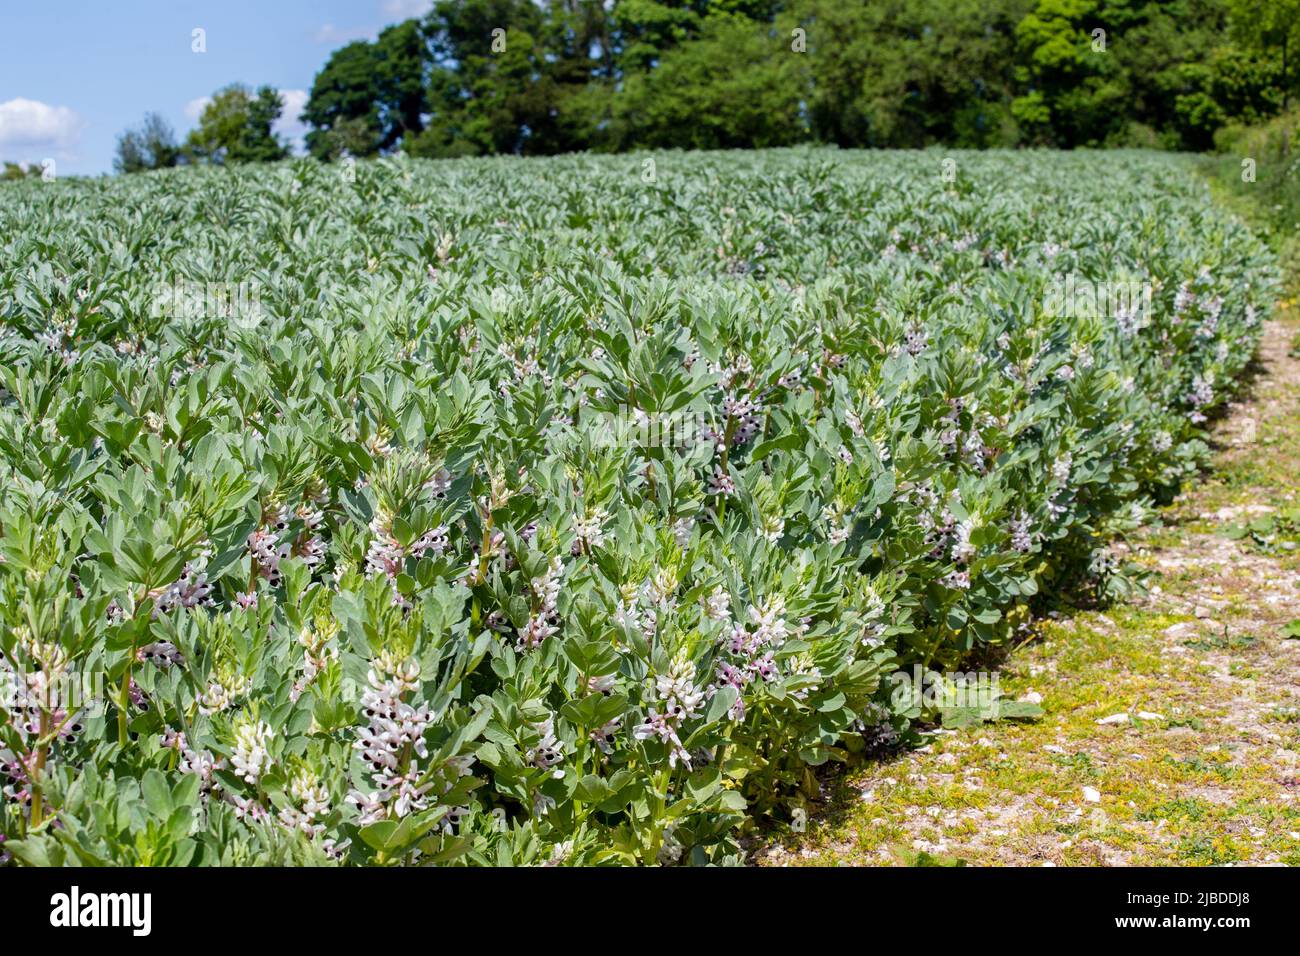 Broad bean plants growing in a farm field, Hampshire, England Stock Photo